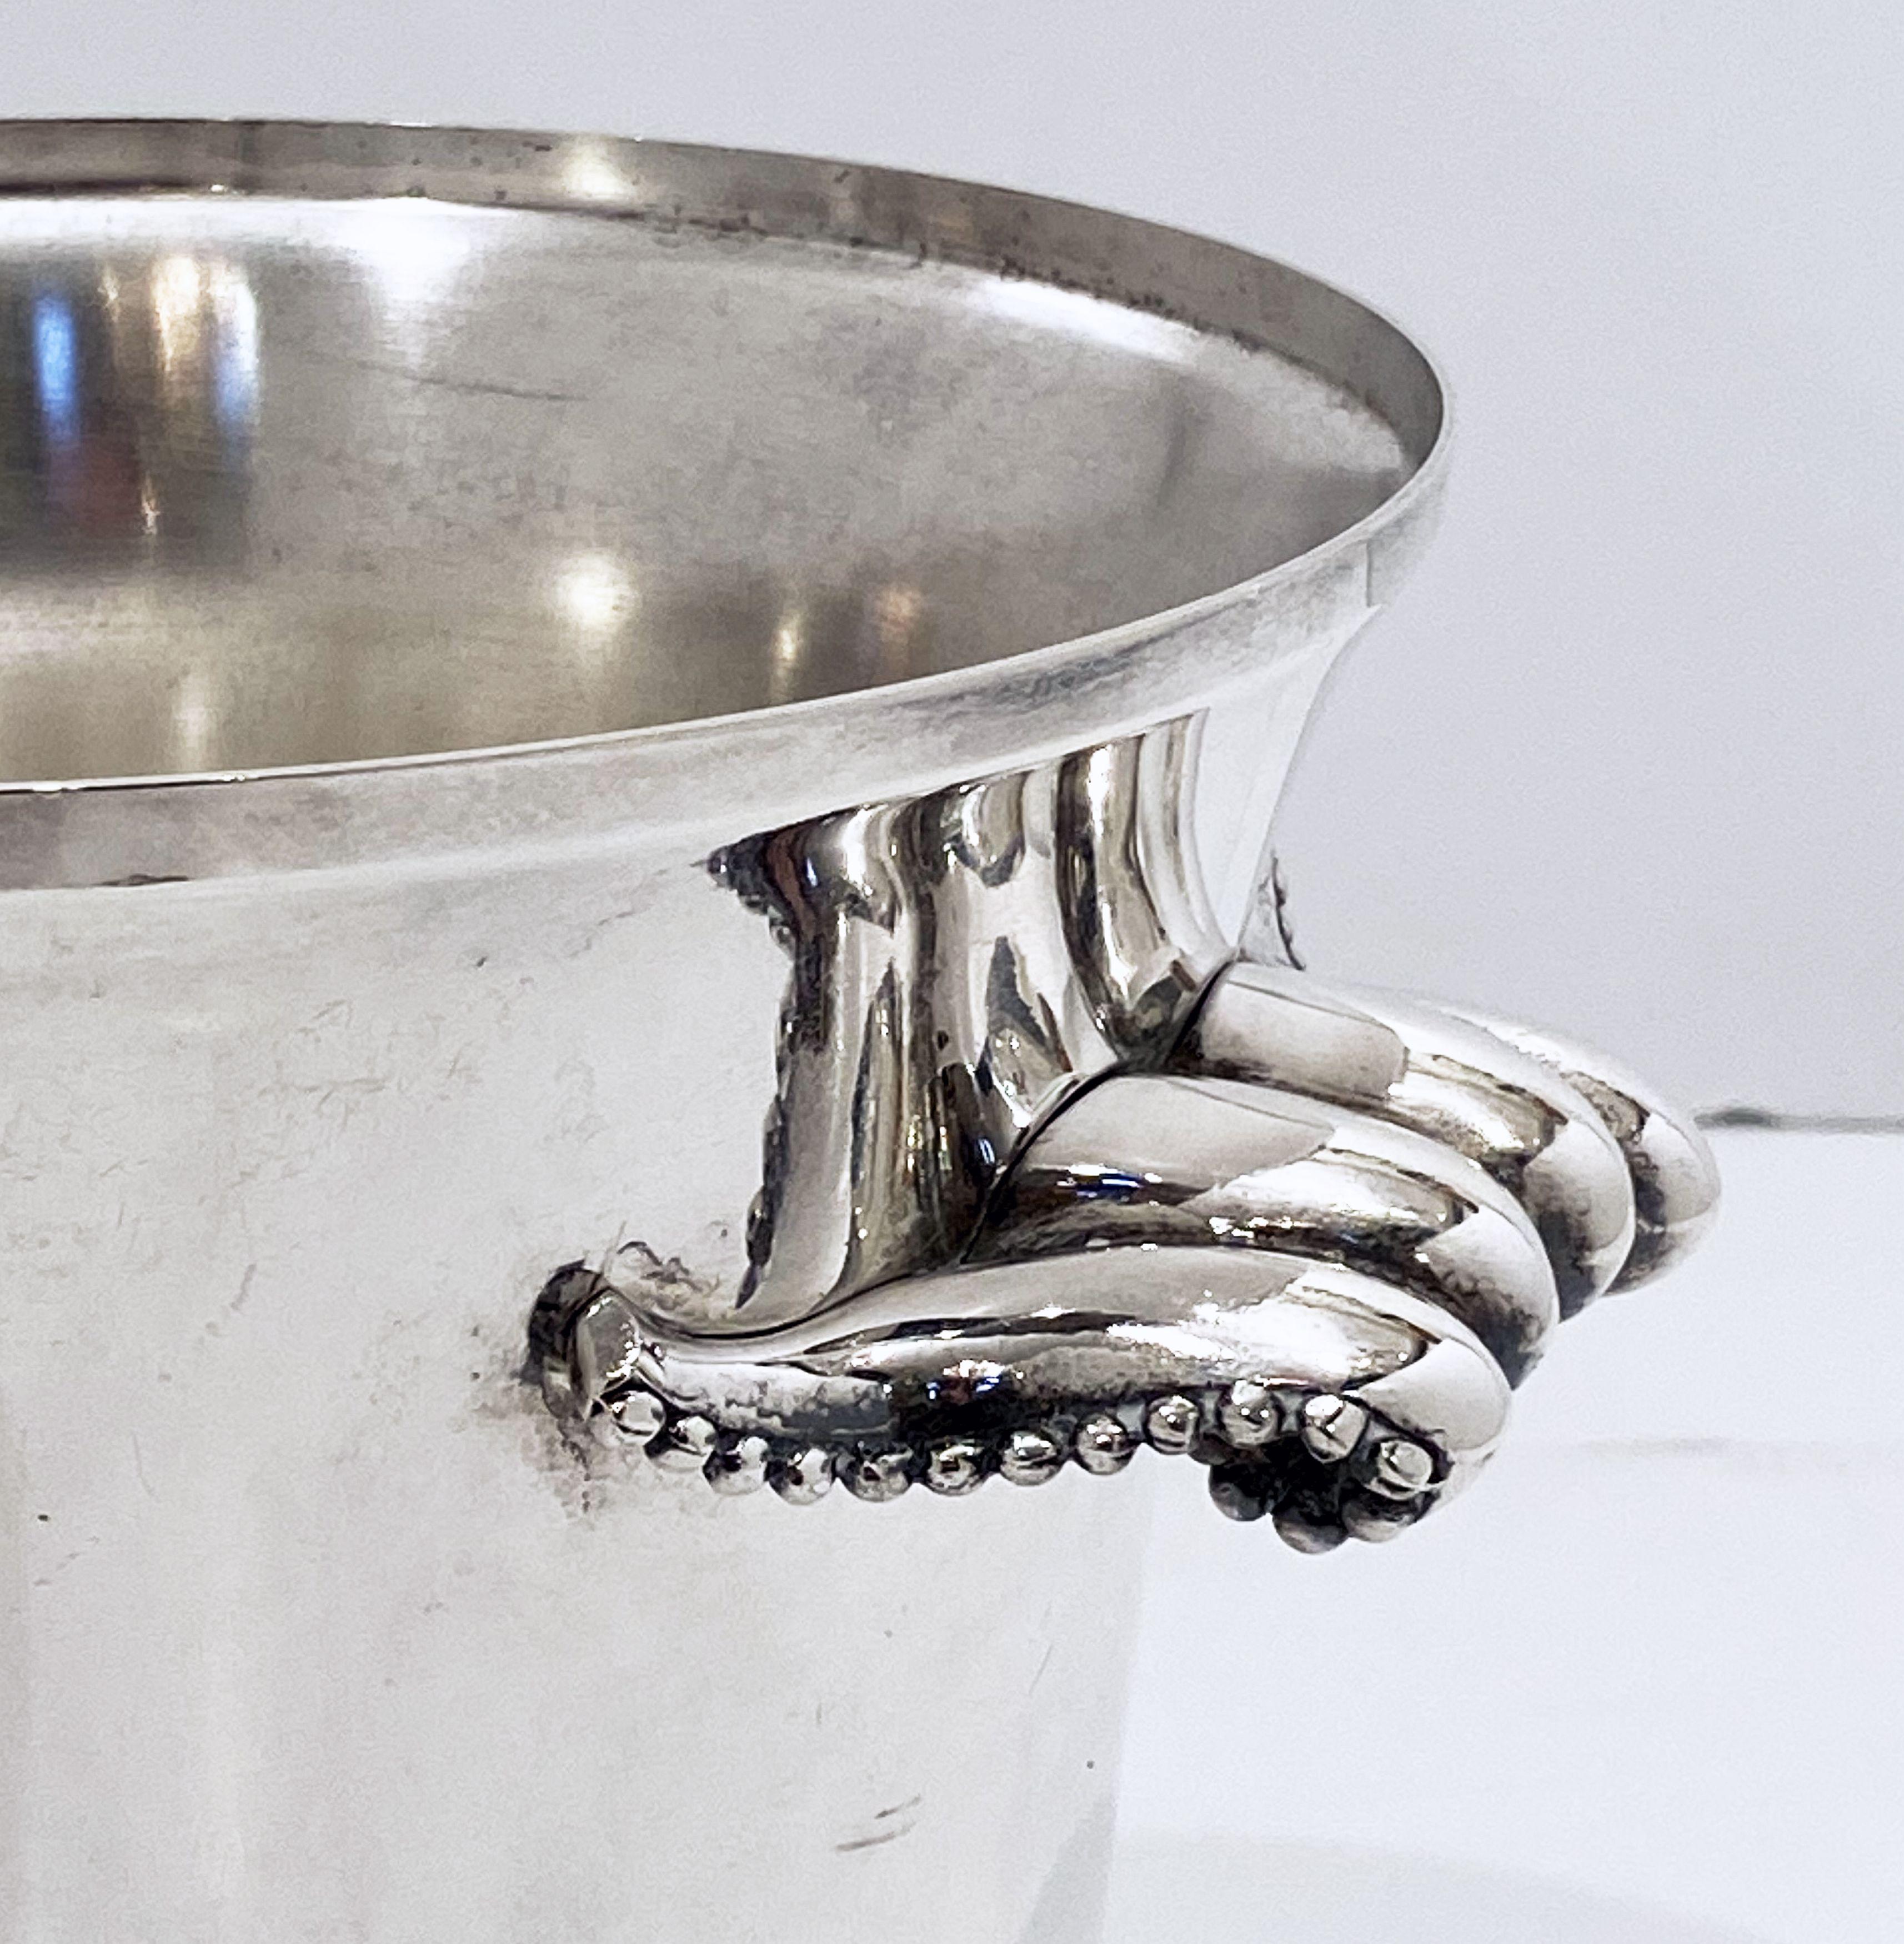 French Silver Champagne or Wine Cooler or Ice Bucket 4